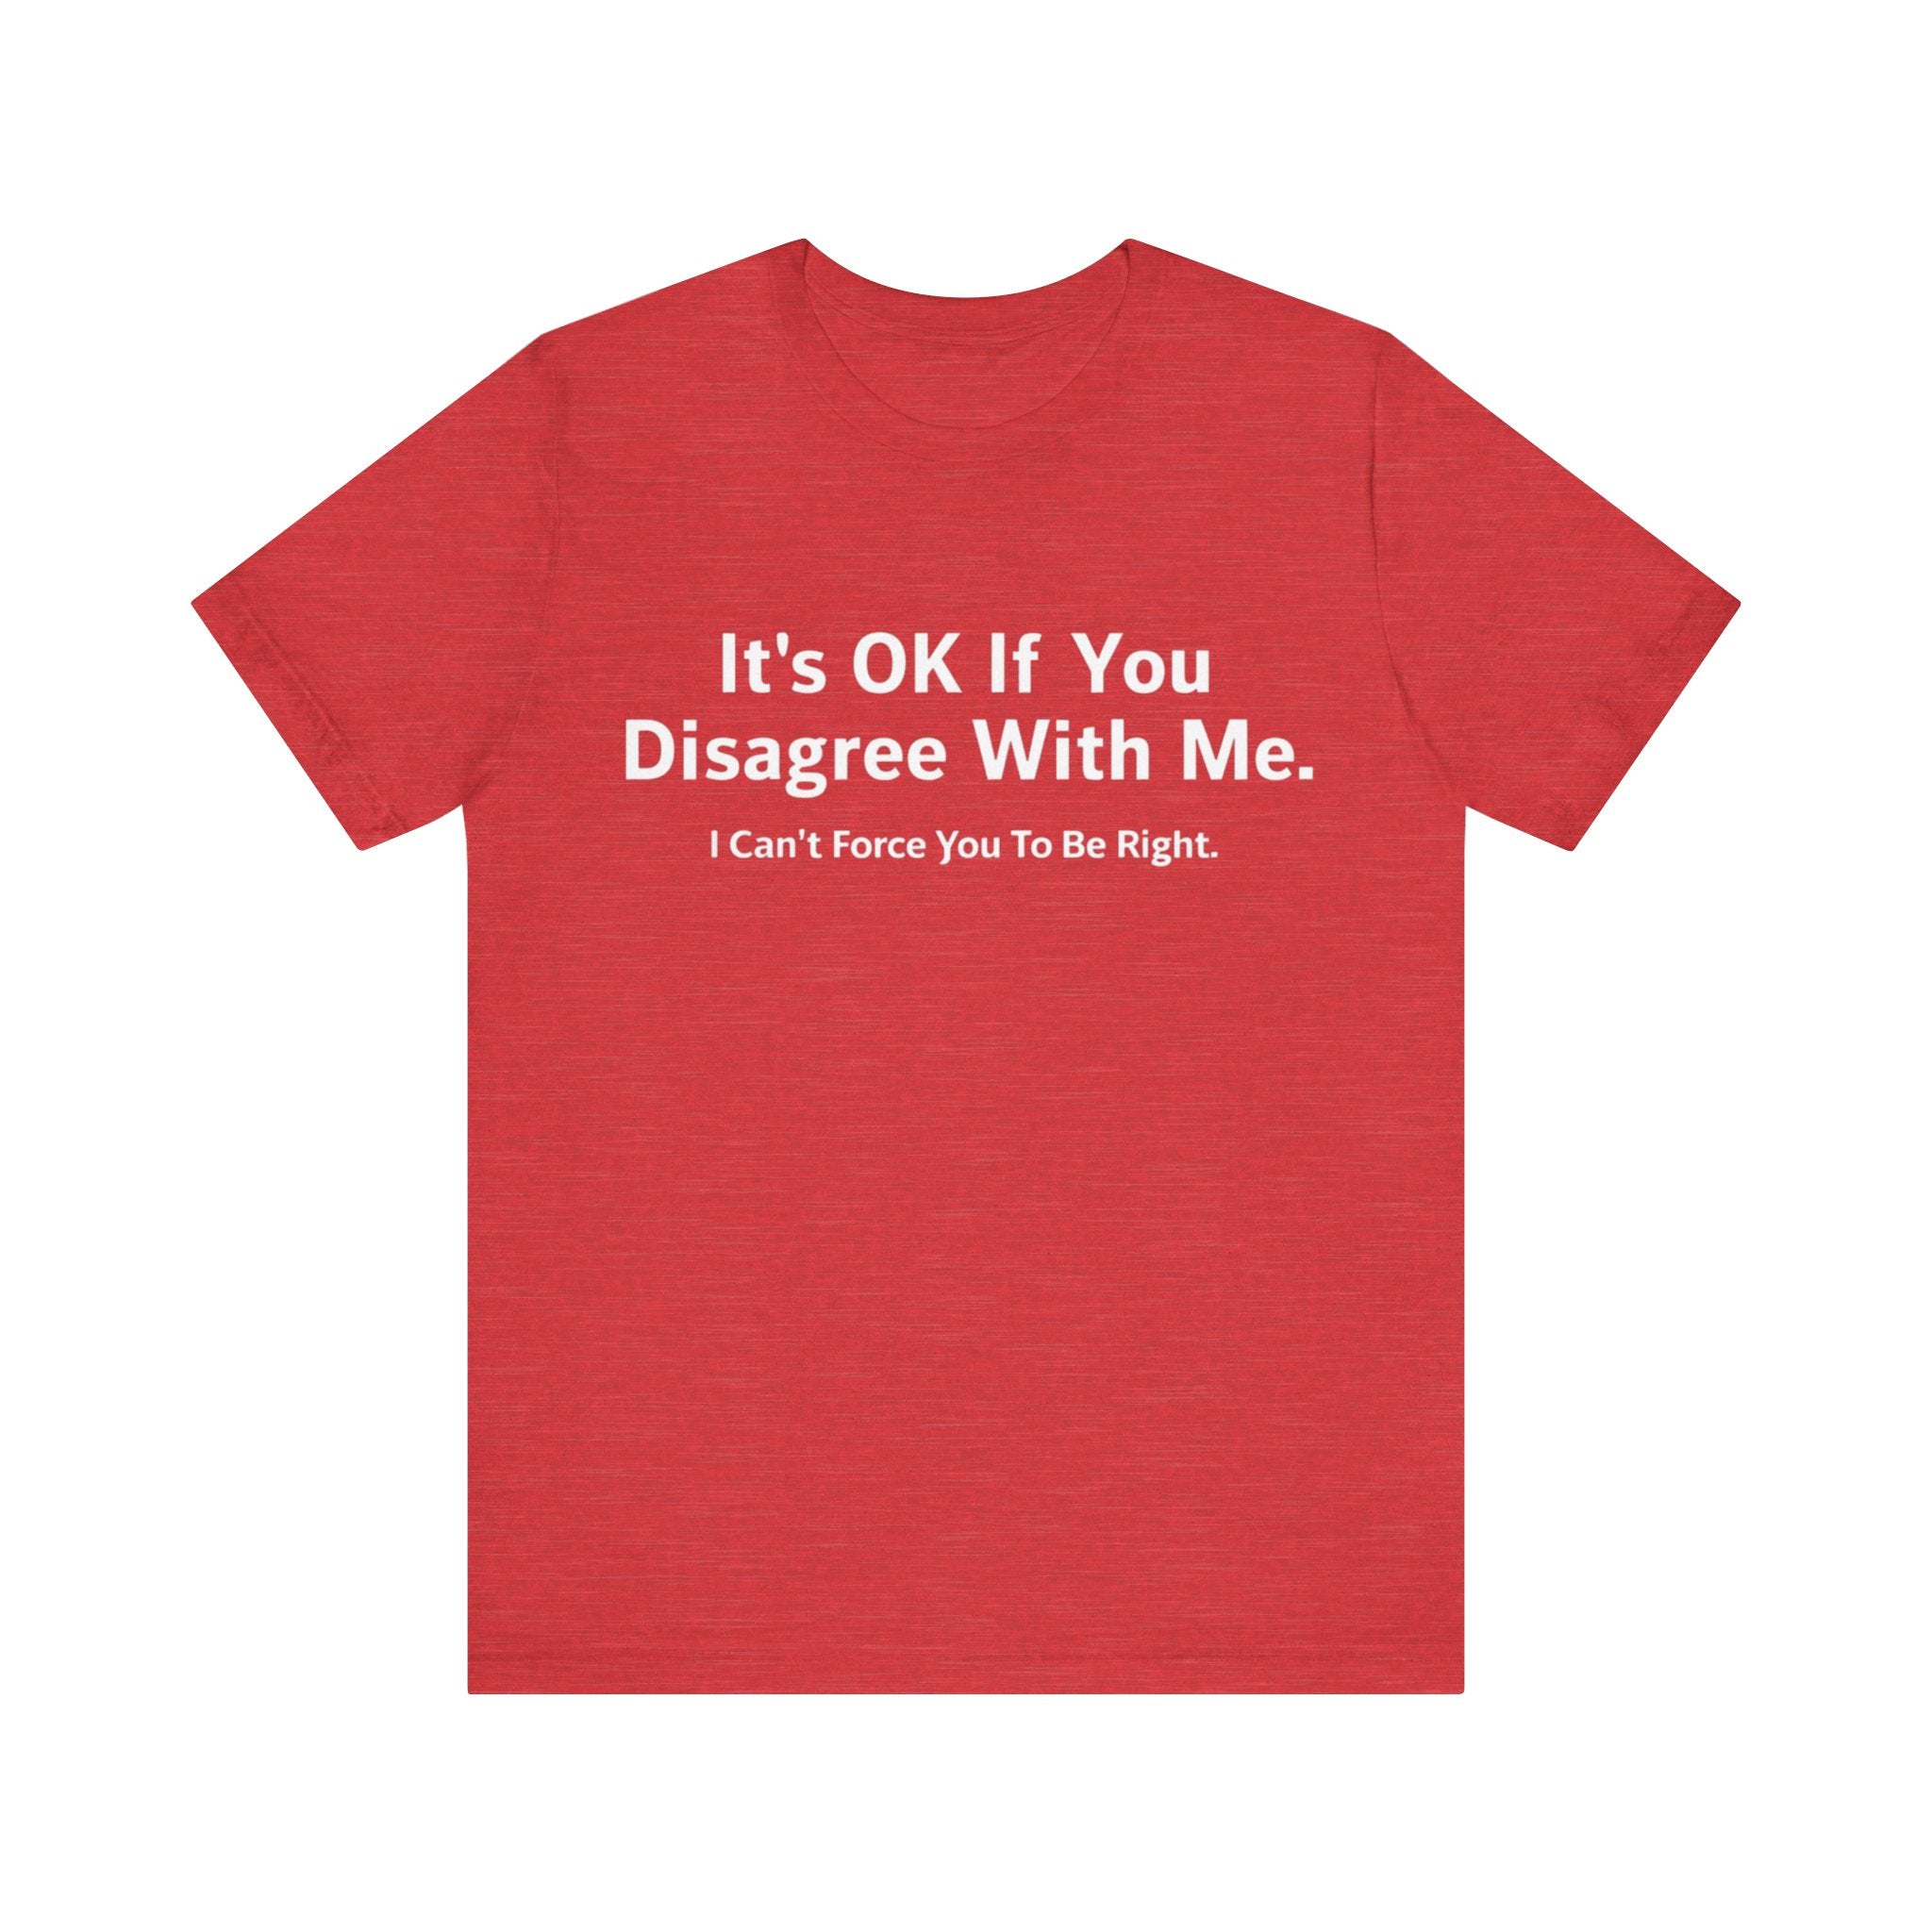 It's Ok If You Disagree With Me - T-Shirt